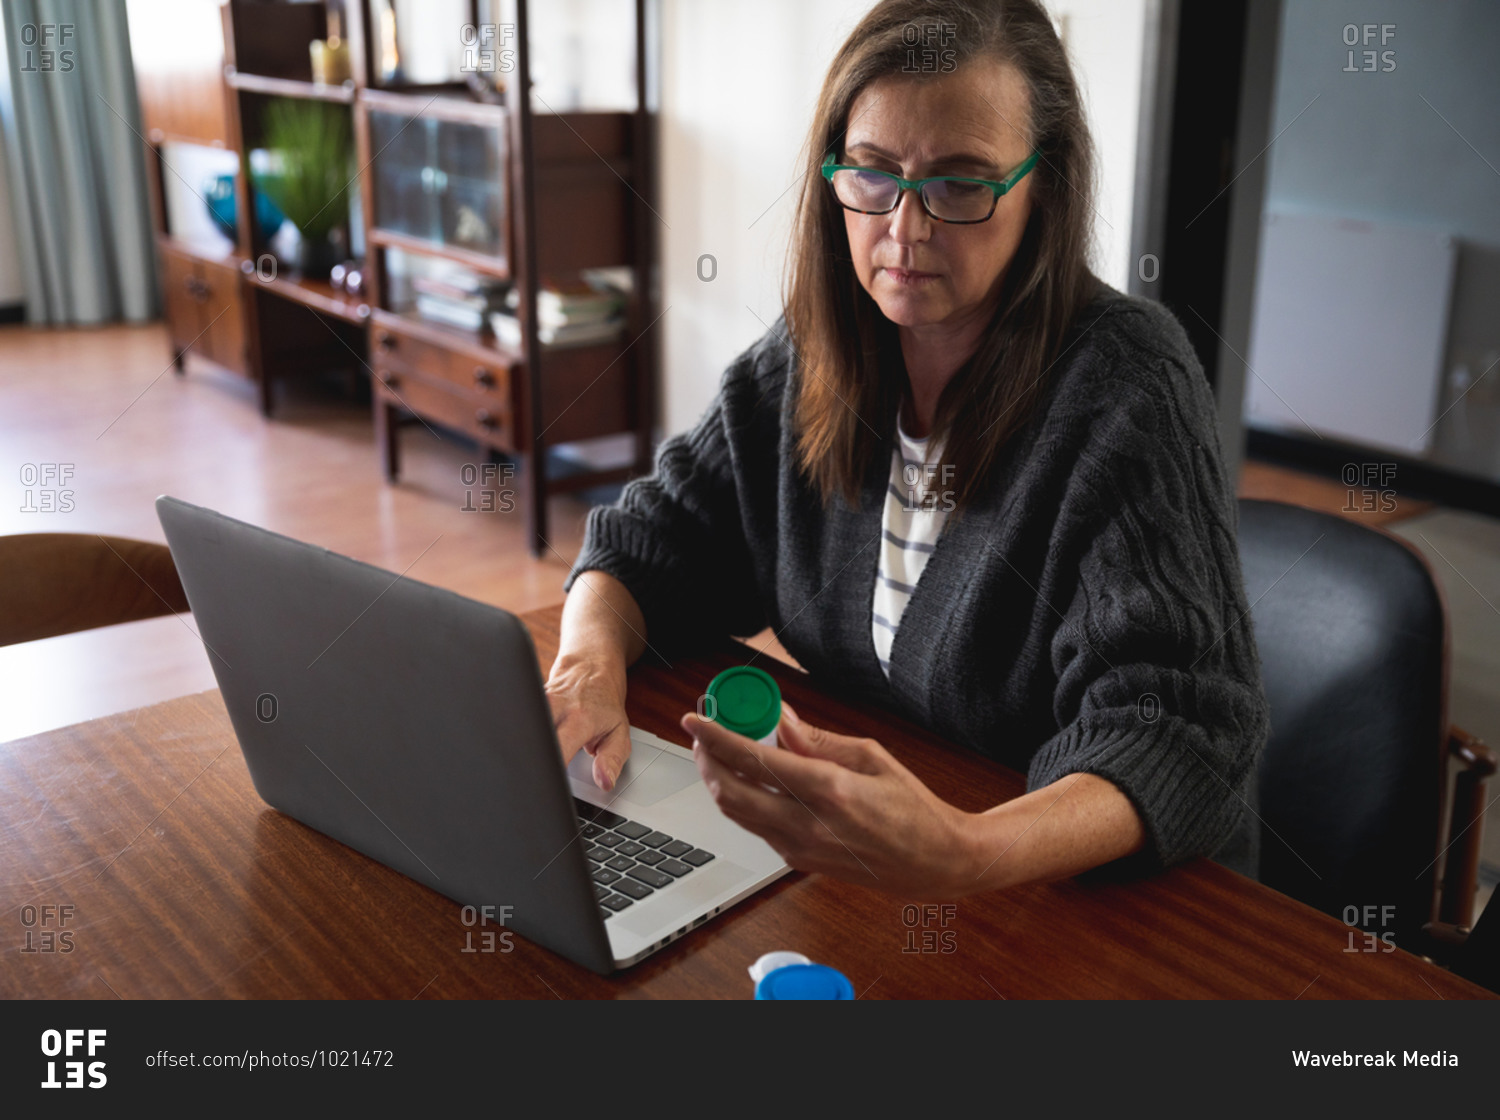 Caucasian woman enjoying time at home, social distancing and self isolation in quarantine lockdown, sitting in living room, using laptop computer, holding medication container.